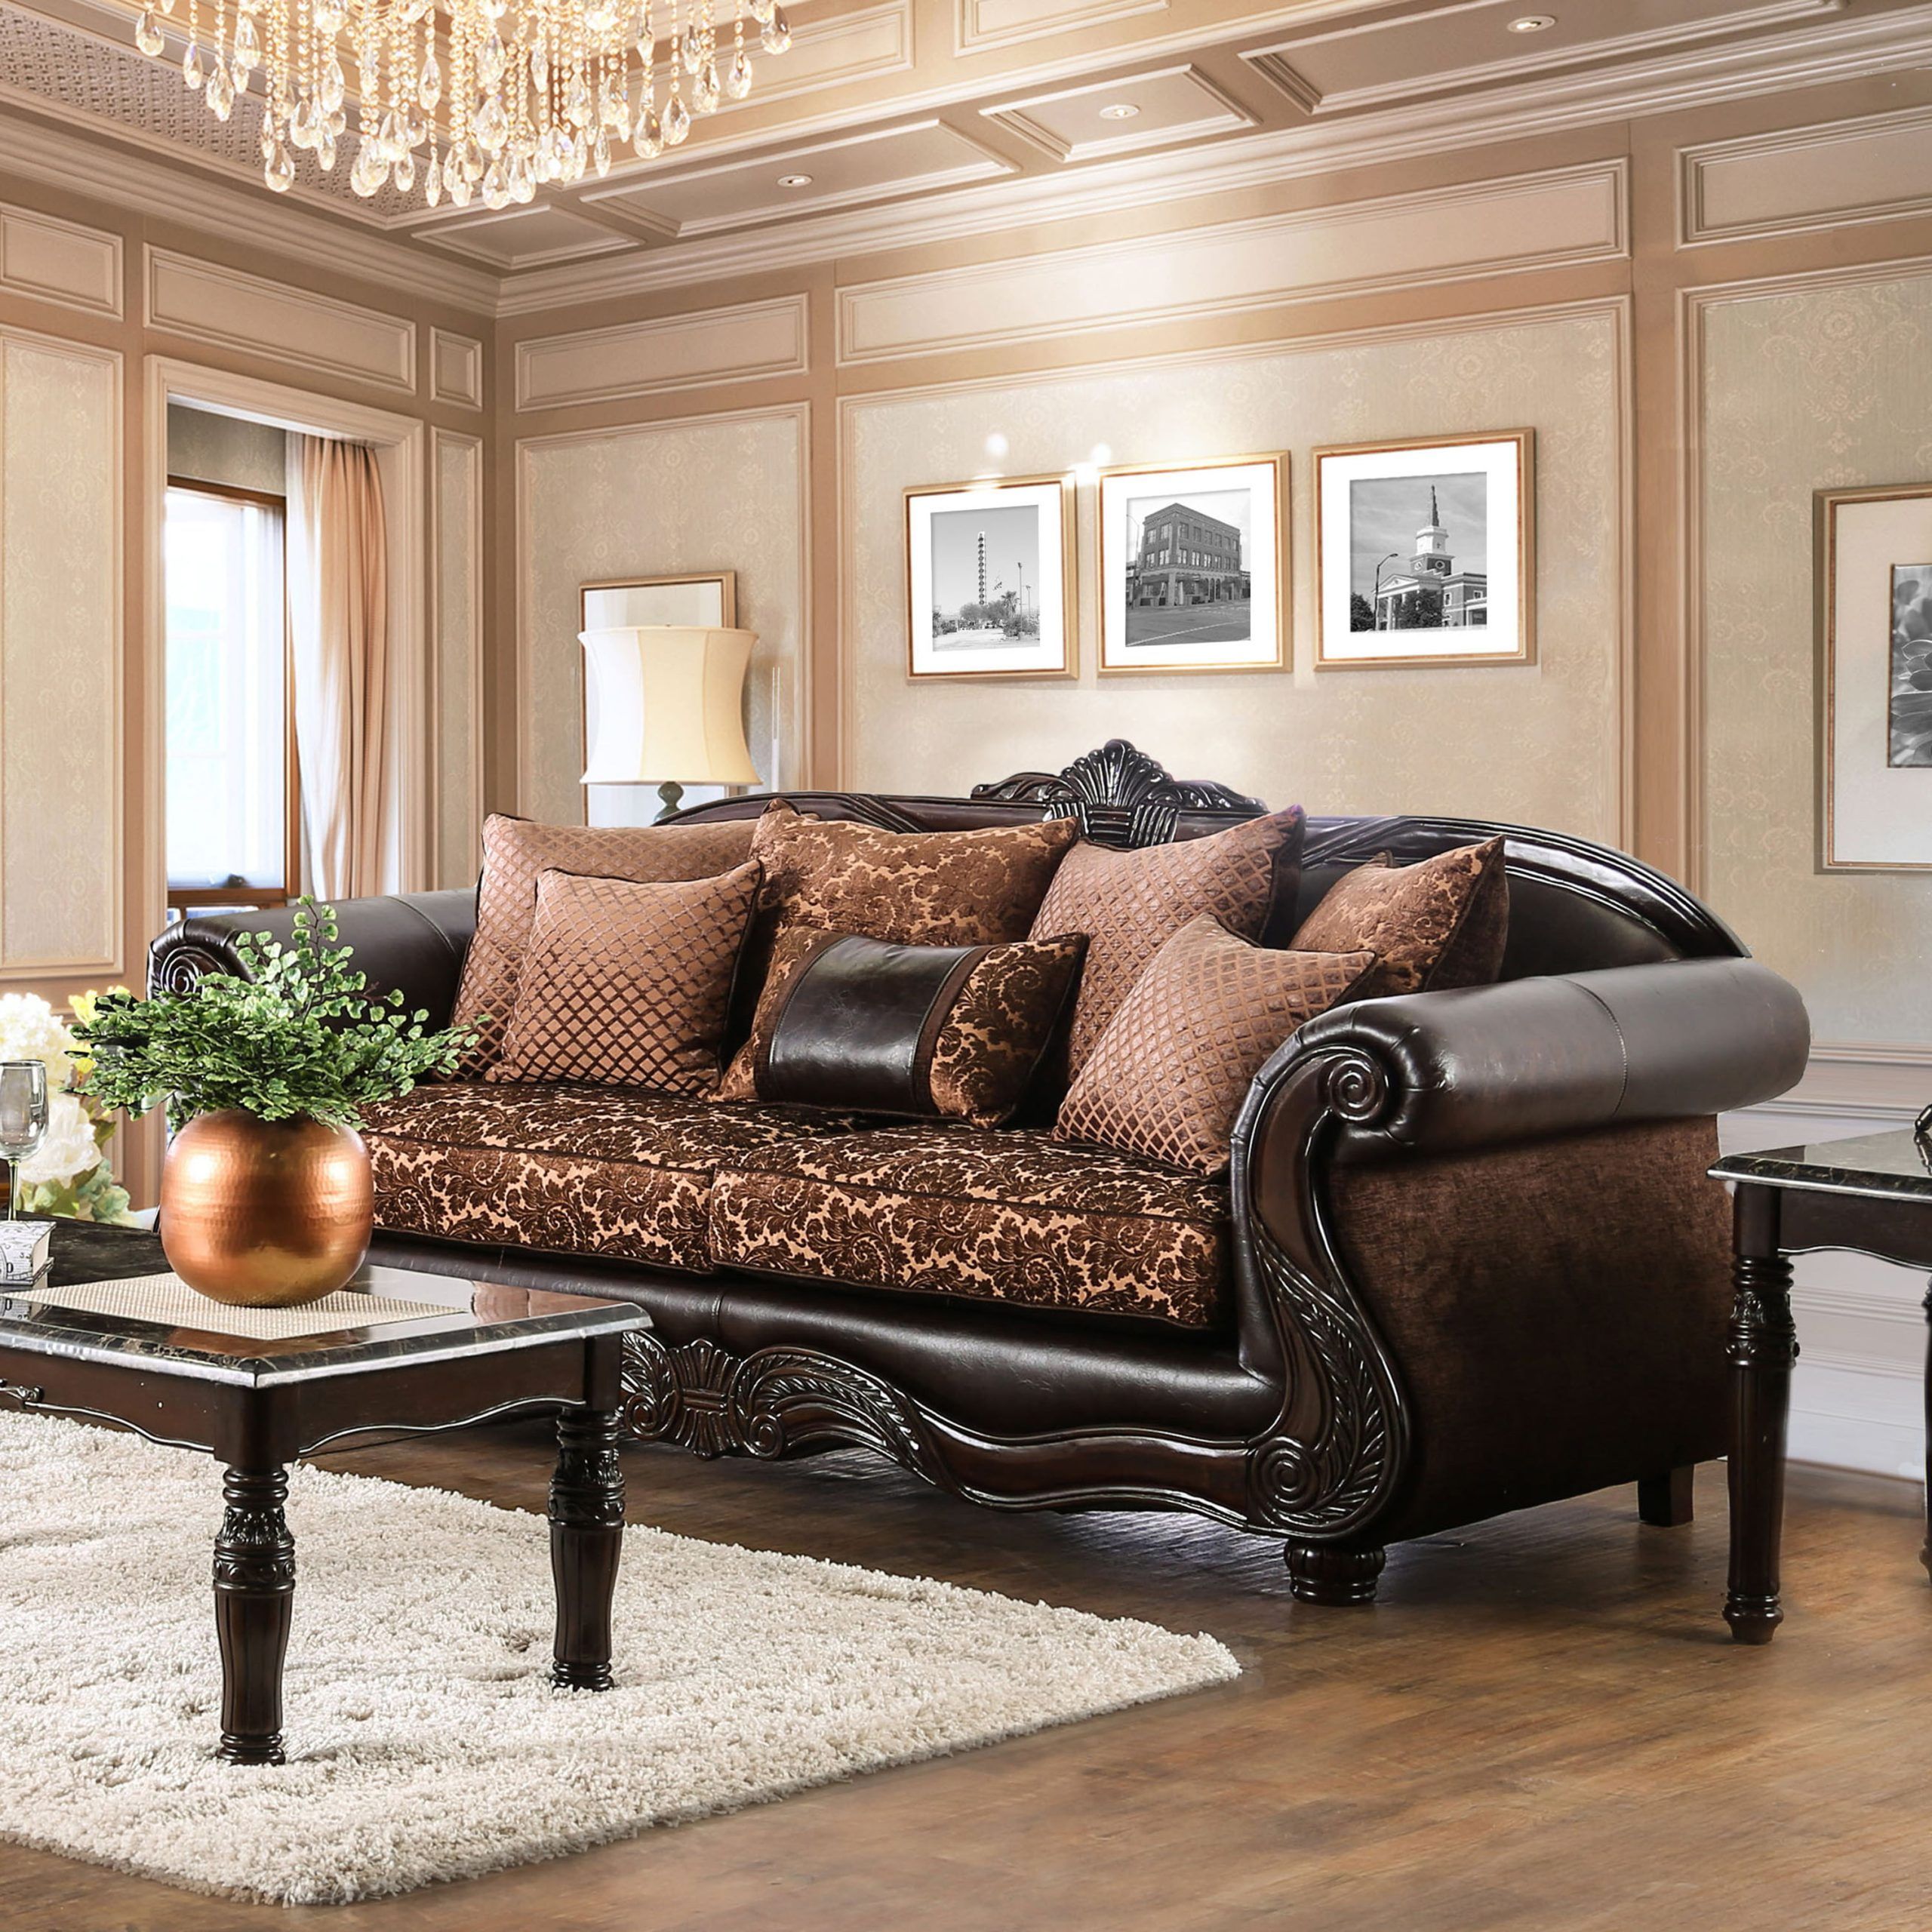 Furniture Of America Traditional Faux Leather Hannon Sofa, Brown Within Faux Leather Sofas In Chocolate Brown (View 6 of 20)